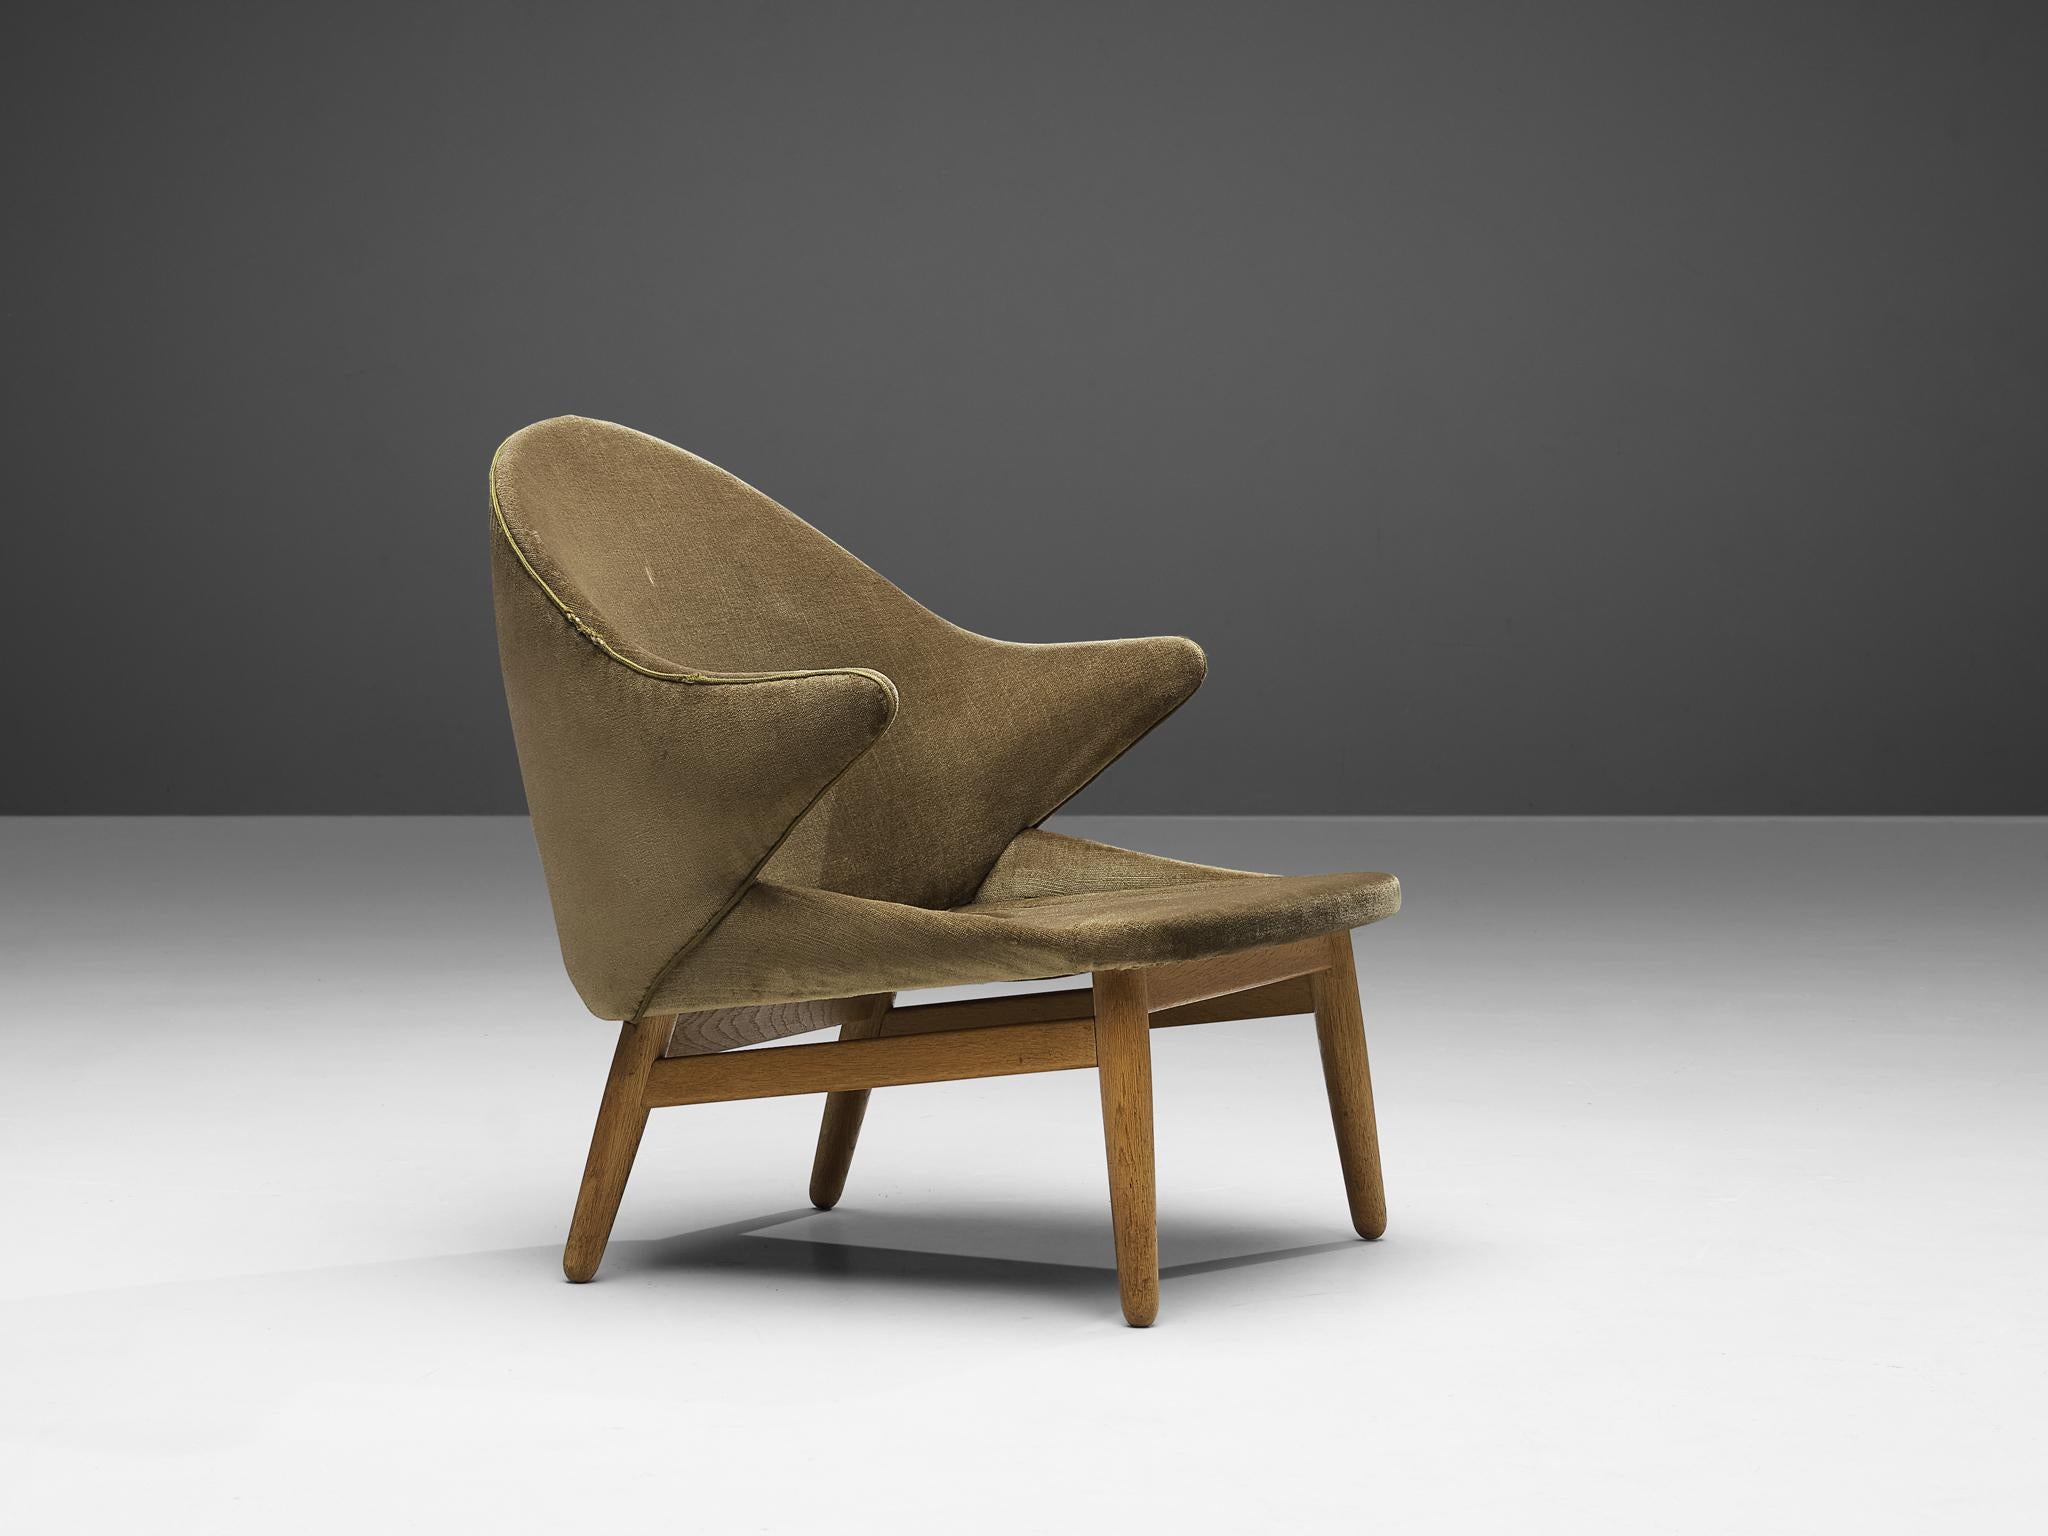 Hans Olsen for Jørgen Jørgensen, armchair, oak, fabric, Denmark, 1956

Elegant Danish lounge chair with oak by Hans Olsen. The chair has a sculptural quality which is created by the armrests which have an interesting shape. The conical legs are